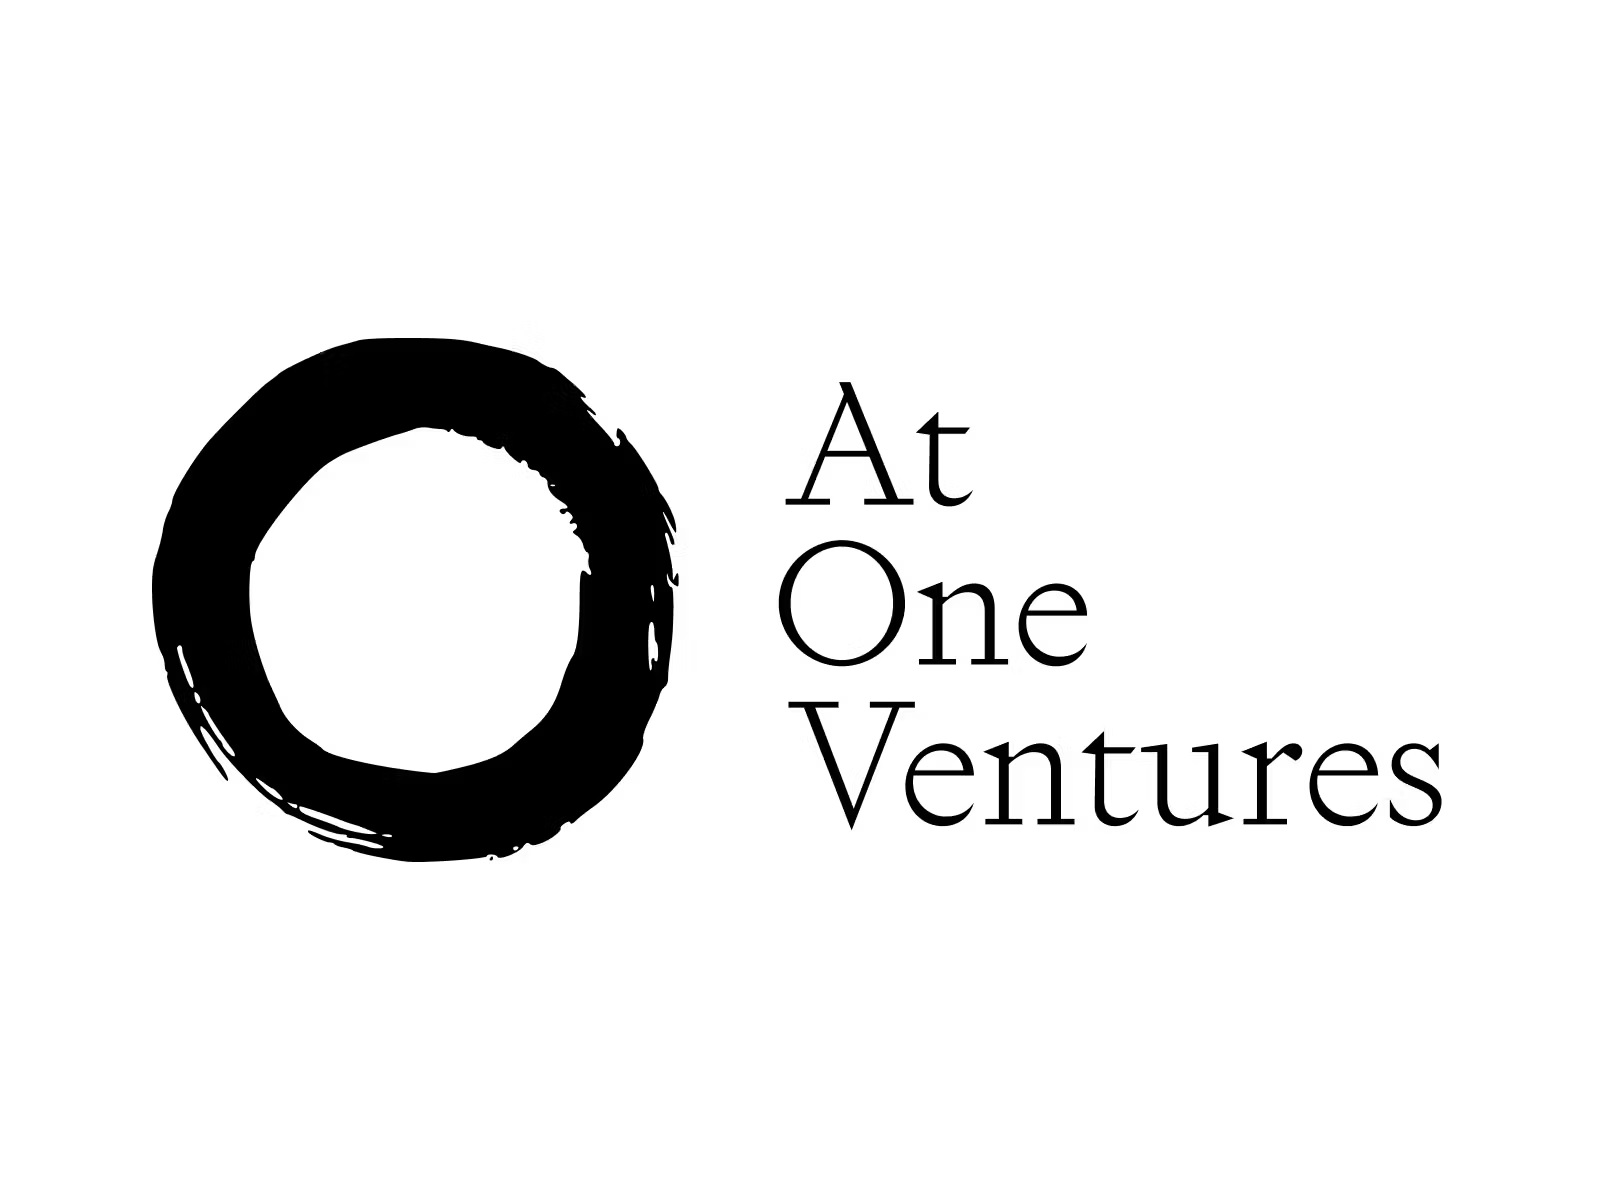 At One Ventures Raises $375M In New Fund, Reinforcing The Continued Demand For Climate Tech